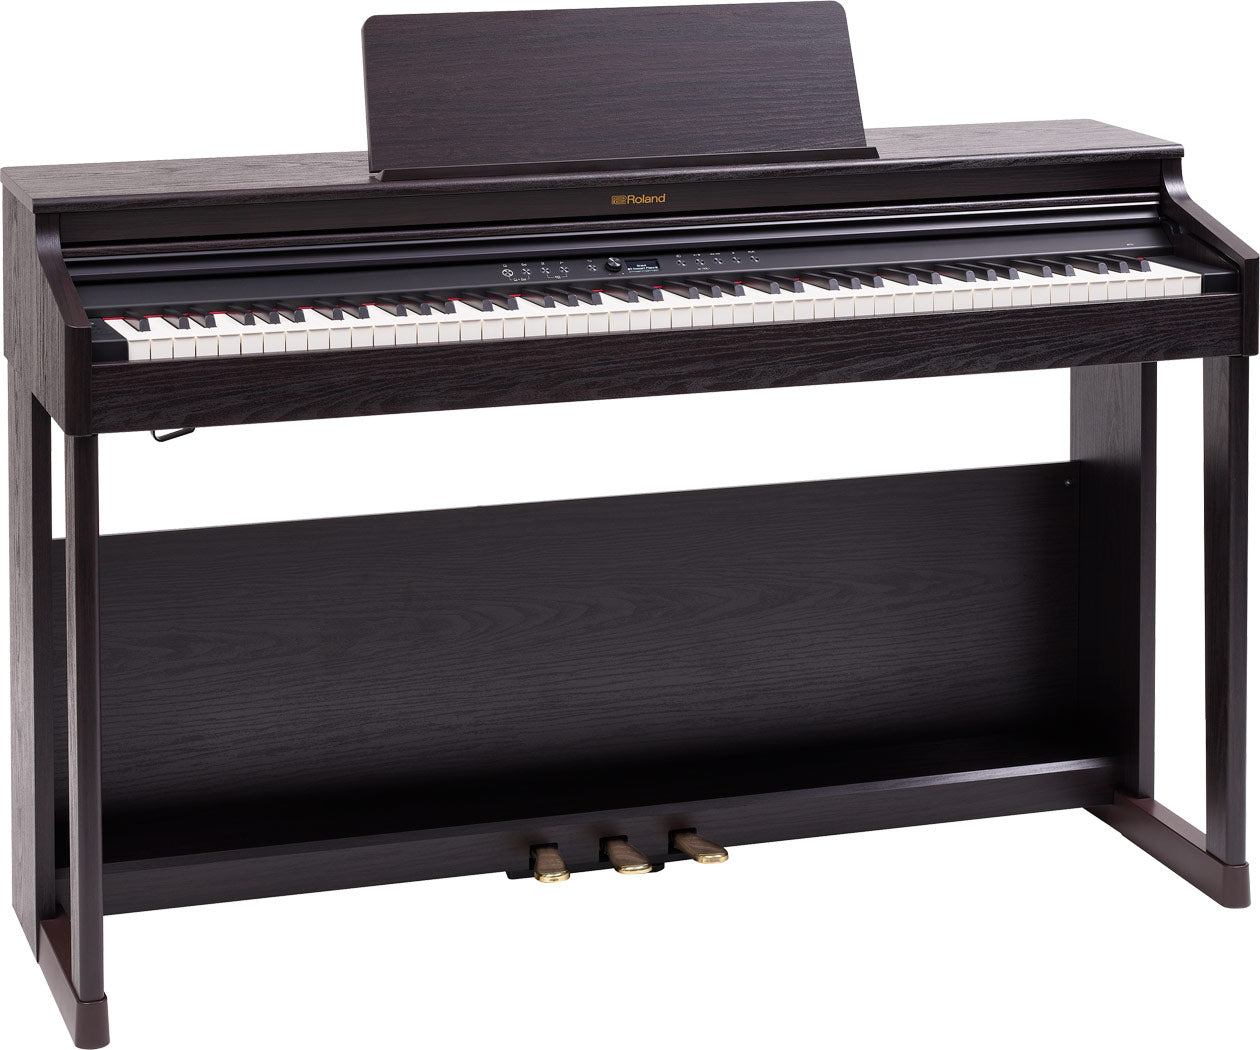 Roland RP-701 Digital Piano - Contemporary Black Finish with Matching Bench